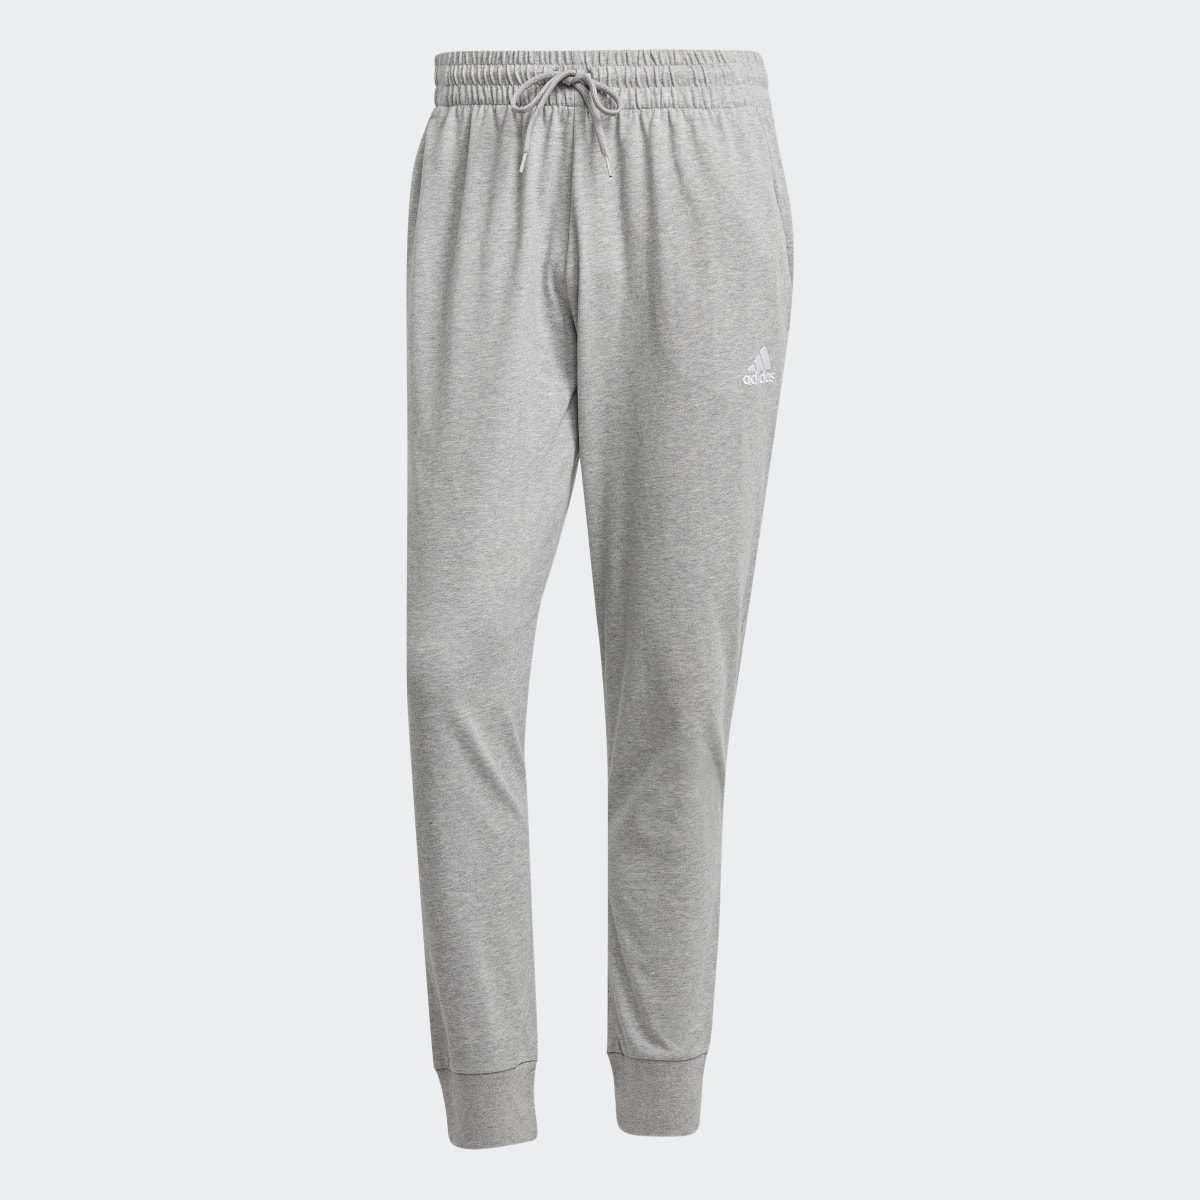 Adidas Essentials Single Jersey Tapered Cuff Pants. 4